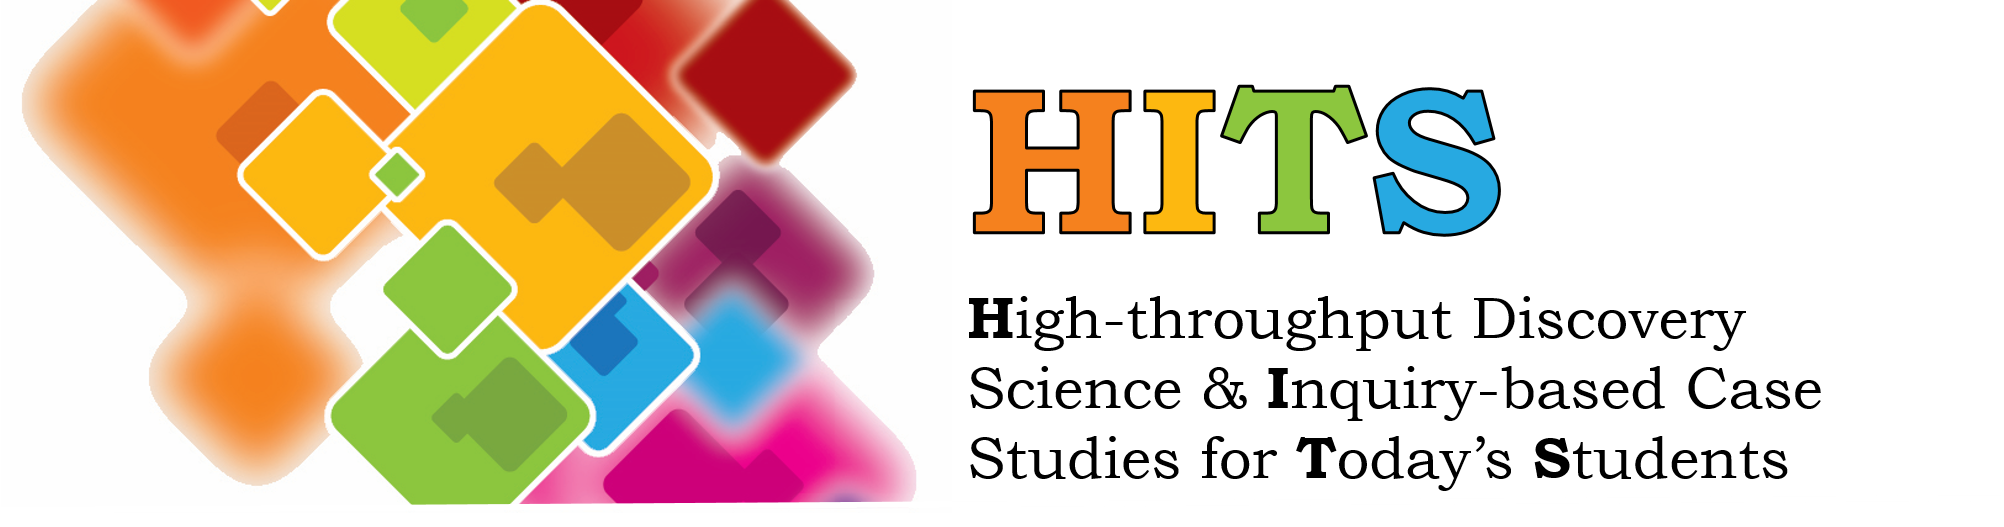 HITS- High-throughput Discovery Science & Inquiry-based Case Studies for Today's Students